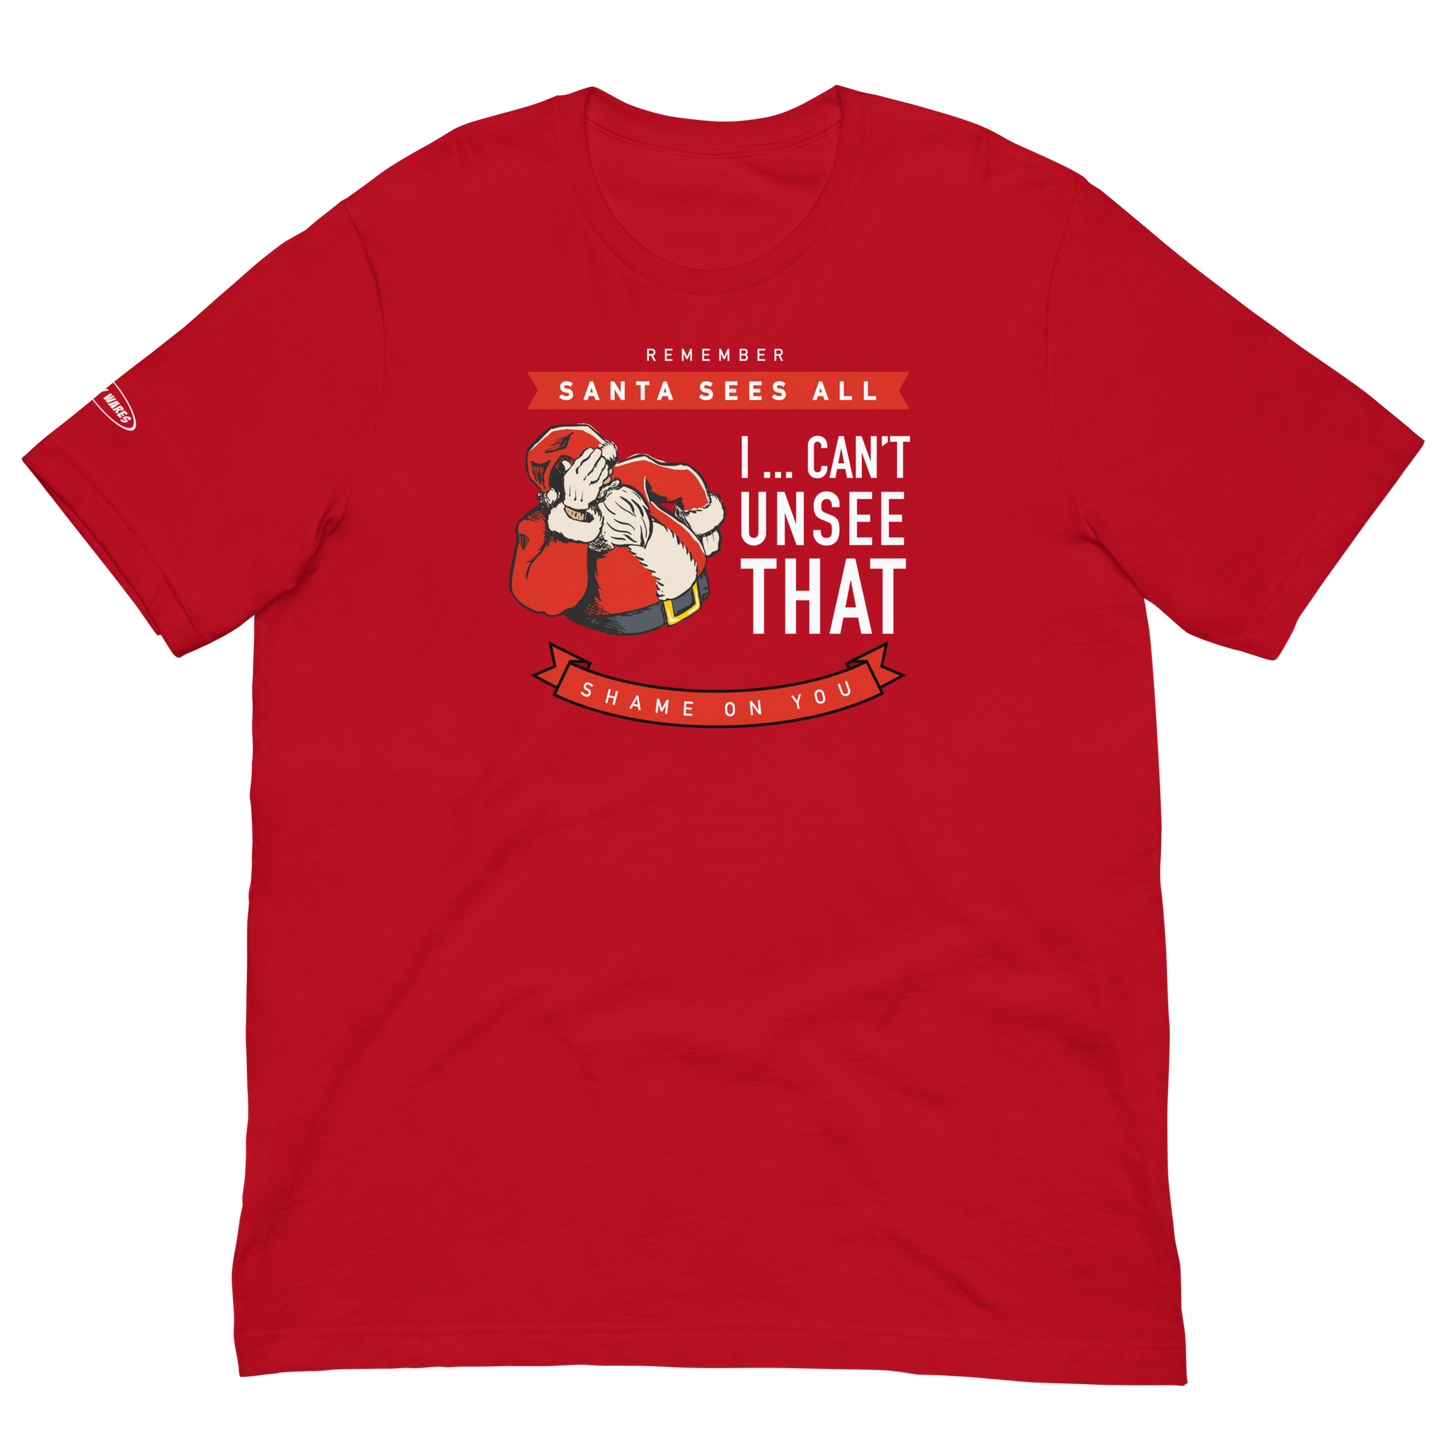 CHRISTMAS - Santa Sees All - I can't unsee that - Funny t-shirt